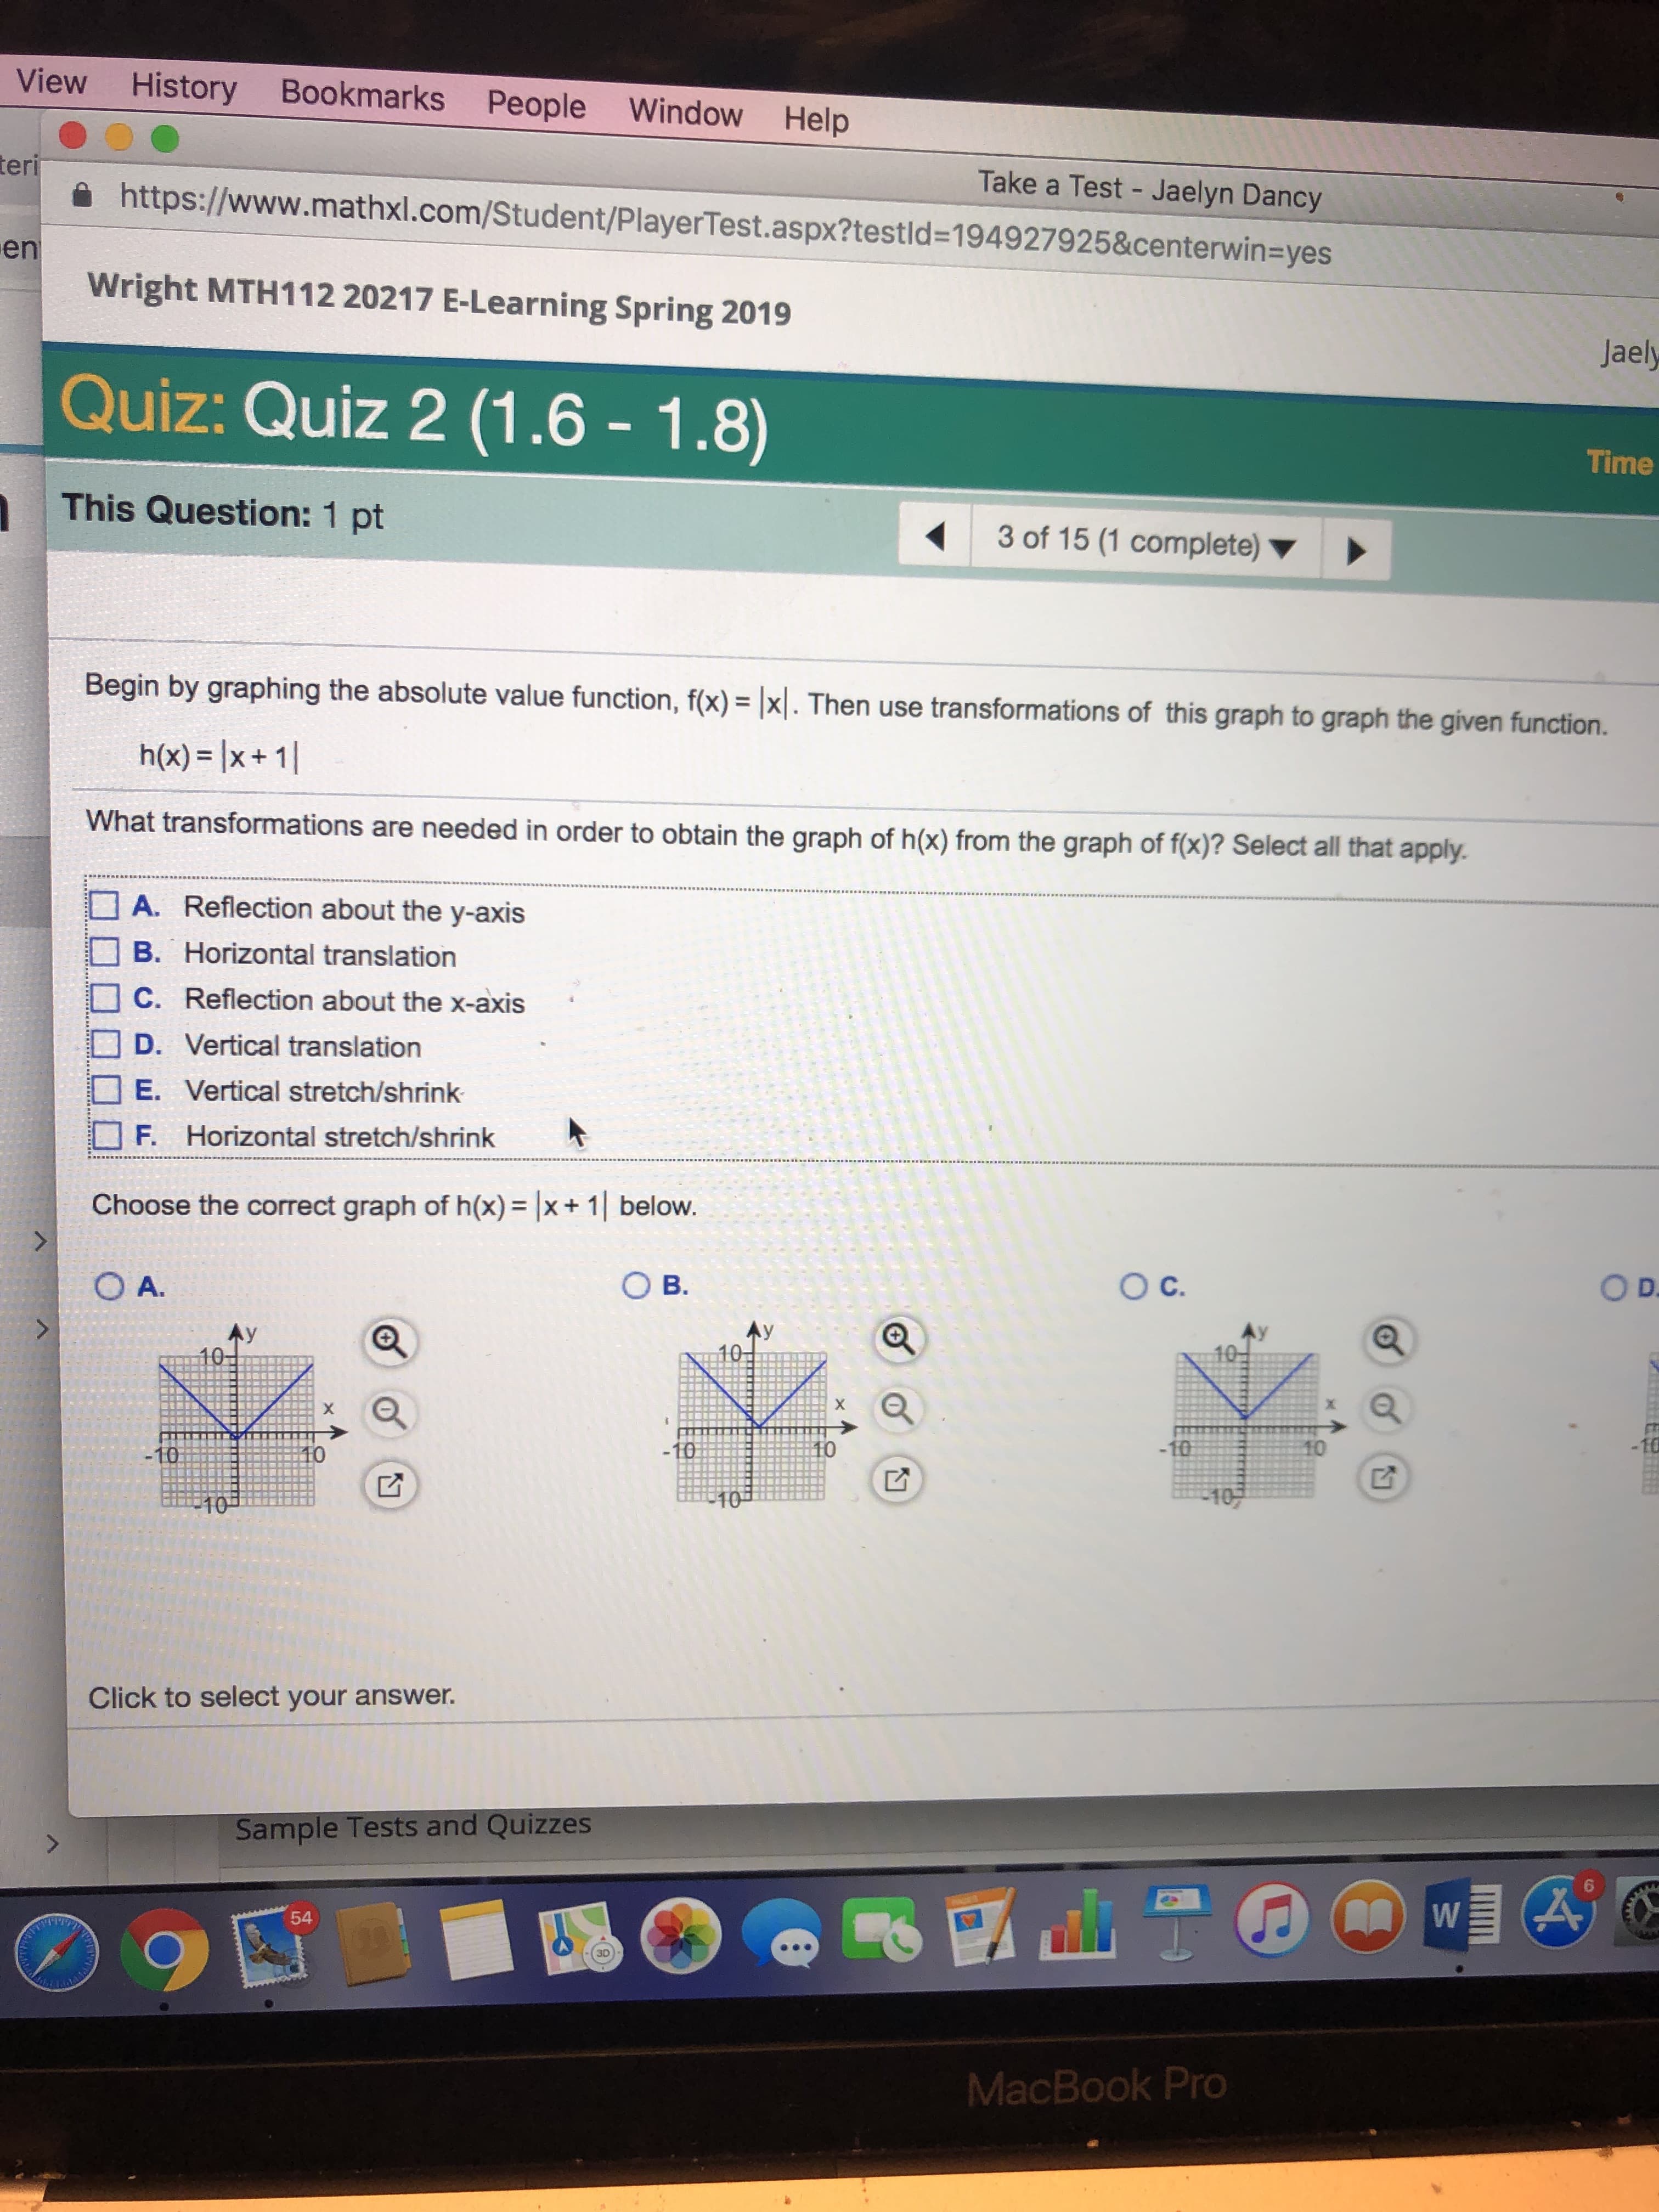 View History Bookmarks People Window Help
Take a Test - Jaelyn Dancy
teri
https://www.mathxl.com/Student/PlayerTest.aspx?testld-194927925&centerwin-yes
Wright MTH112 20217 E-Learning Spring 2019
Quize
This Question: 1 pt
en
QUİZ: Quiz 2 (1.6-1.8)
Time
3 of 15 (1 complete)
Begin
by graphing the absolute value function, f(x)x. Then use transformations of this graph to graph the given function.
h(x)- Ix+1
What transformations
are needed in order to obtain the graph of h(x) from the graph of f(x)? Select all that apply
A. Reflection about the y-axis
B. Horizontal translation
□ C. Reflection about the x-axis
D. Vertical translation
E. Vertical stretch/shrink
□ F. Horizontal stretch/shrink
Choose the correct graph of h(x)= |x + 1 | below
O A
O B.
Ay
10
10
Click to select your answer.
Sample Tests and Quizzes
MacBook Pro
